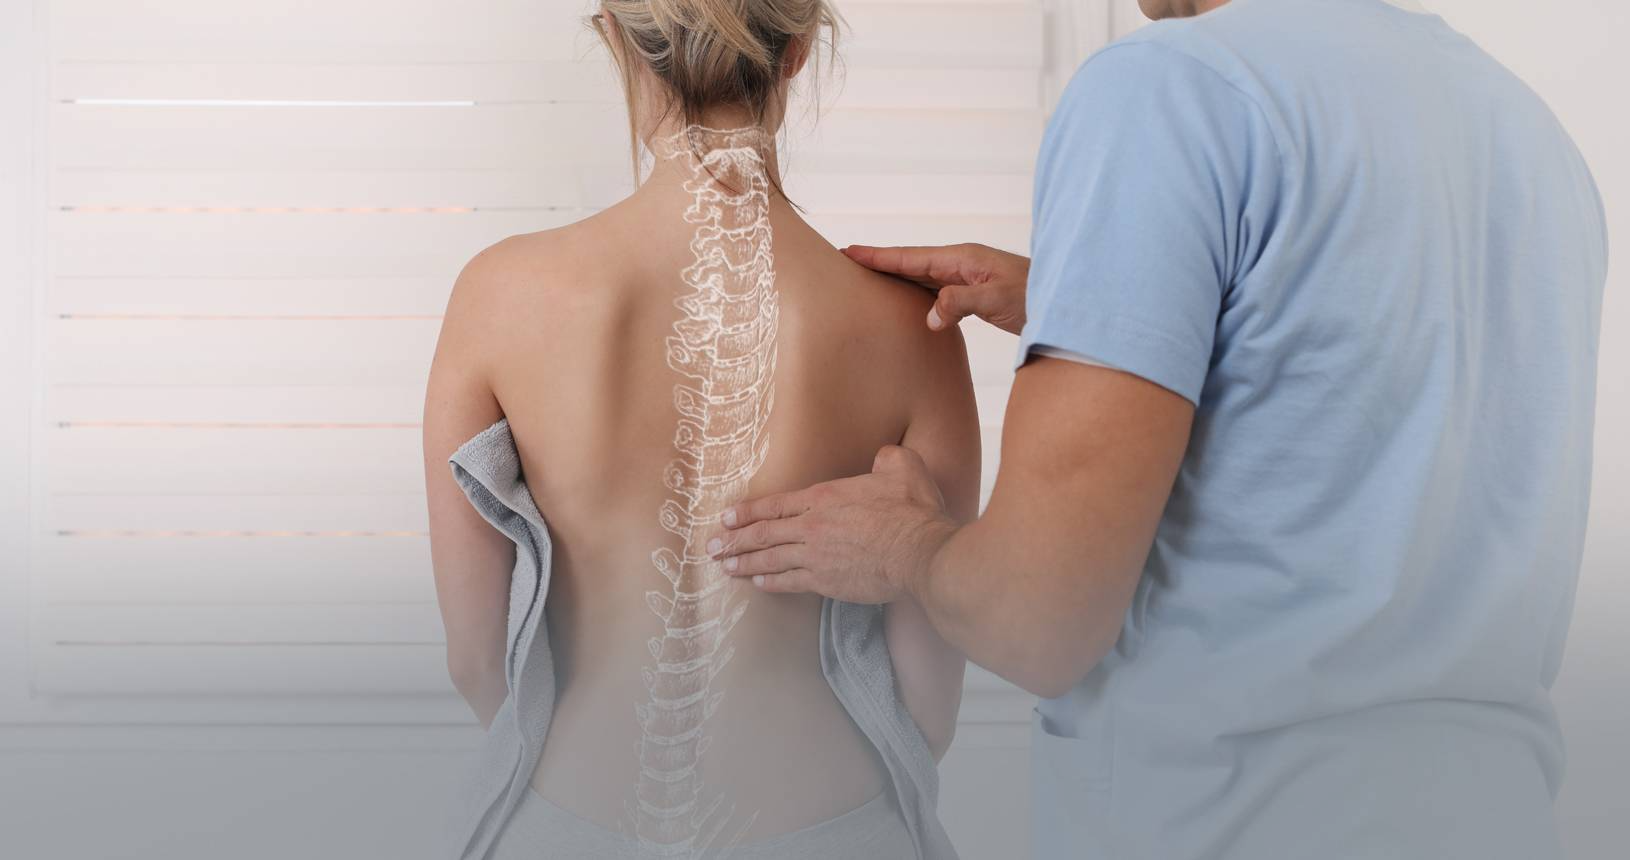 Posture and Pain: How Your Everyday Habits Impact Your Spine